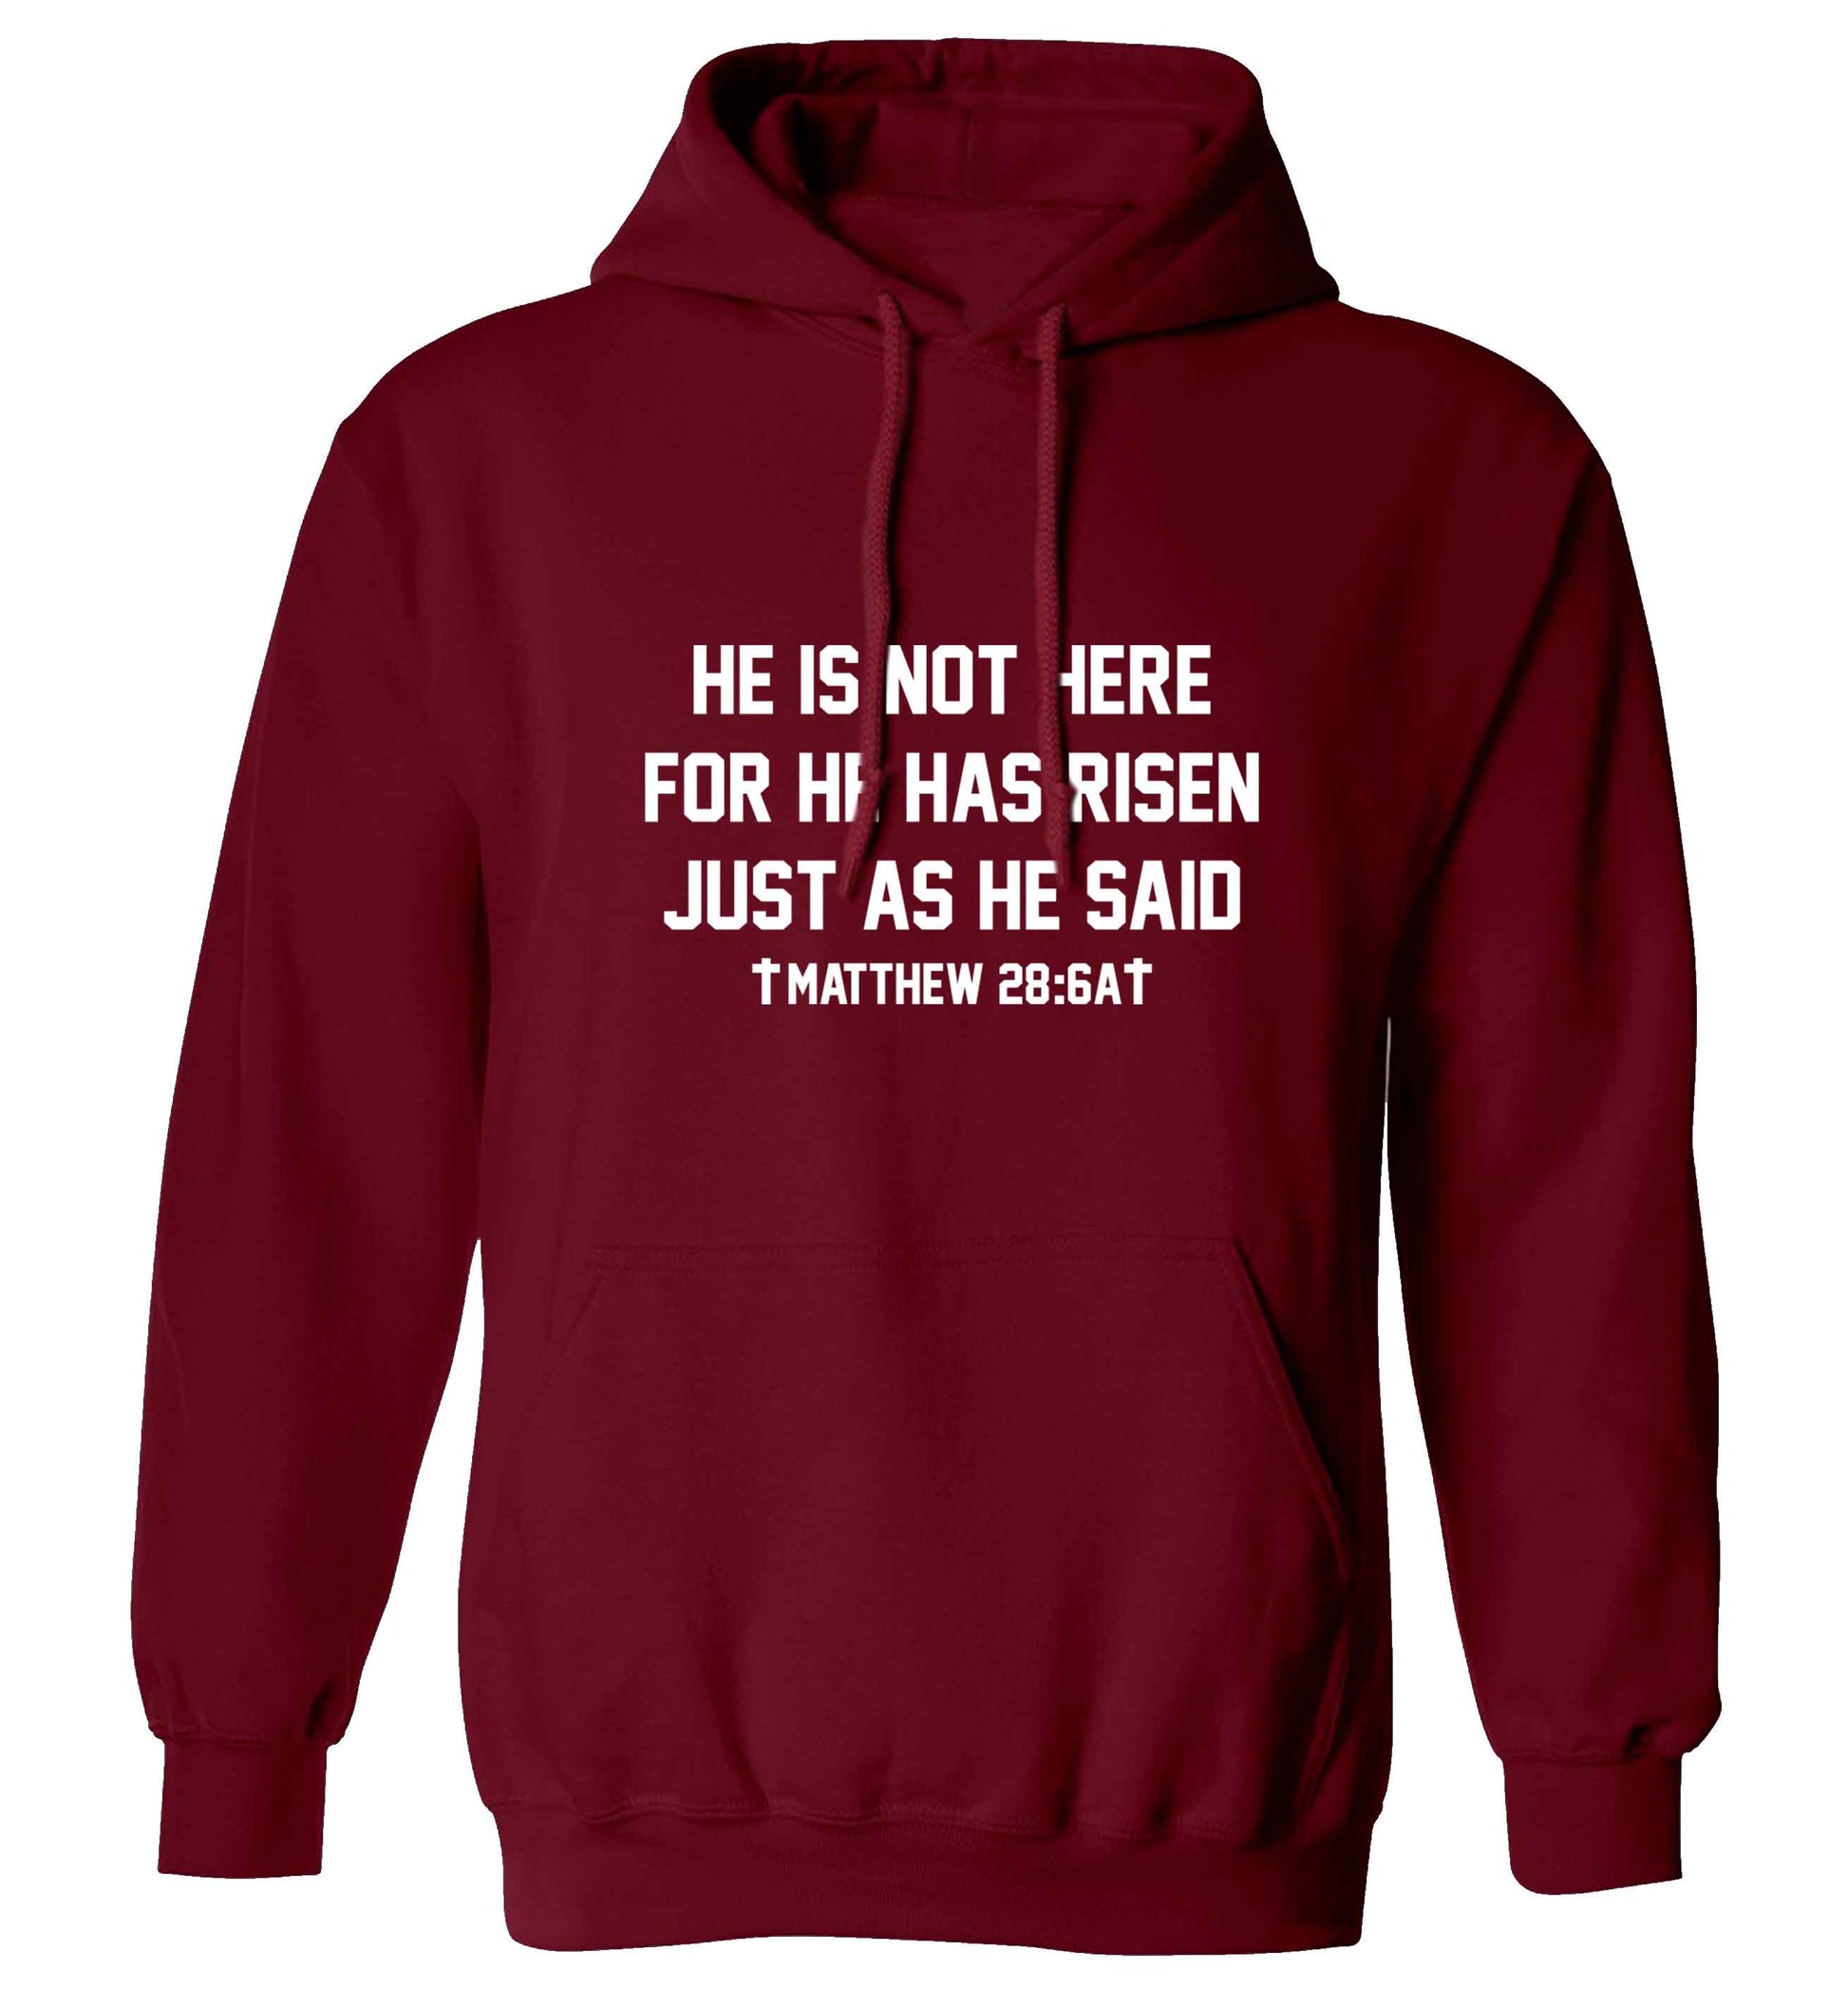 He is not here for he has risen just as he said matthew 28:6A adults unisex maroon hoodie 2XL